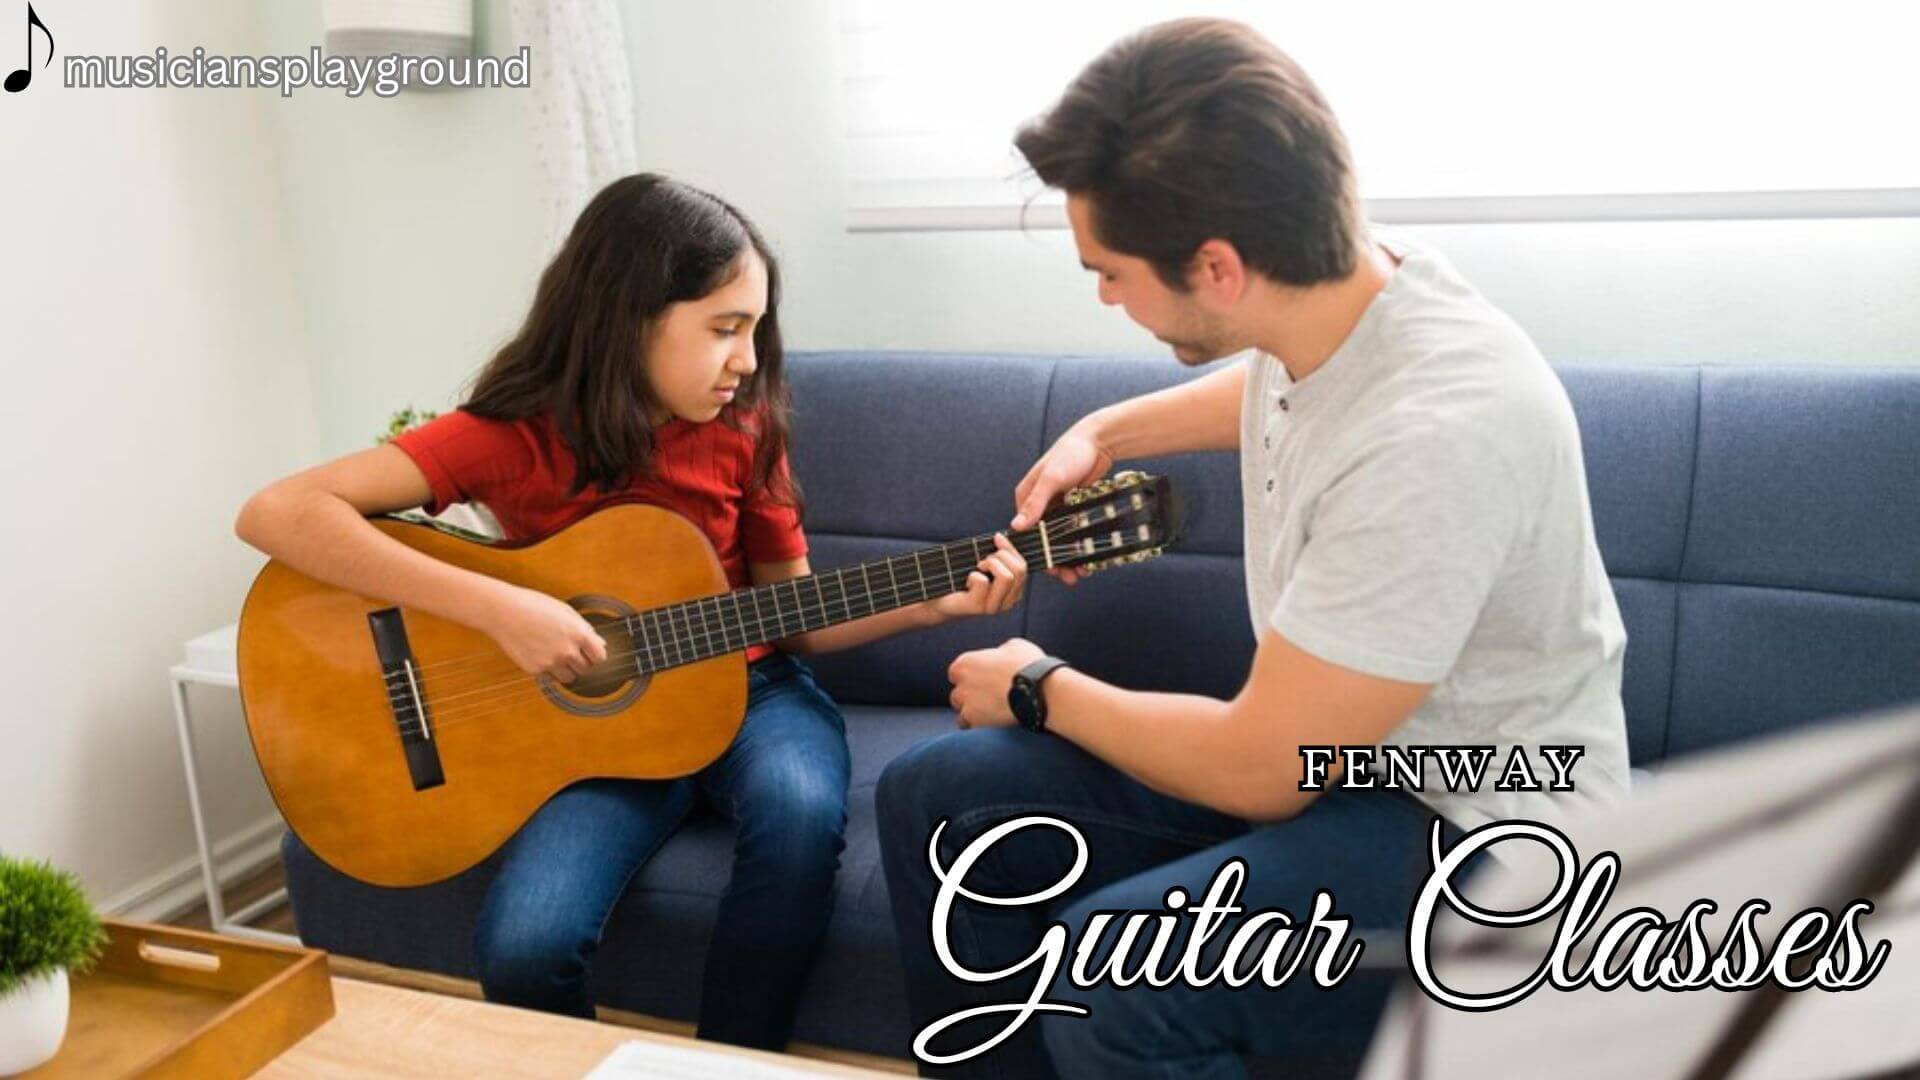 Welcome to Guitar Classes in Fenway, Massachusetts